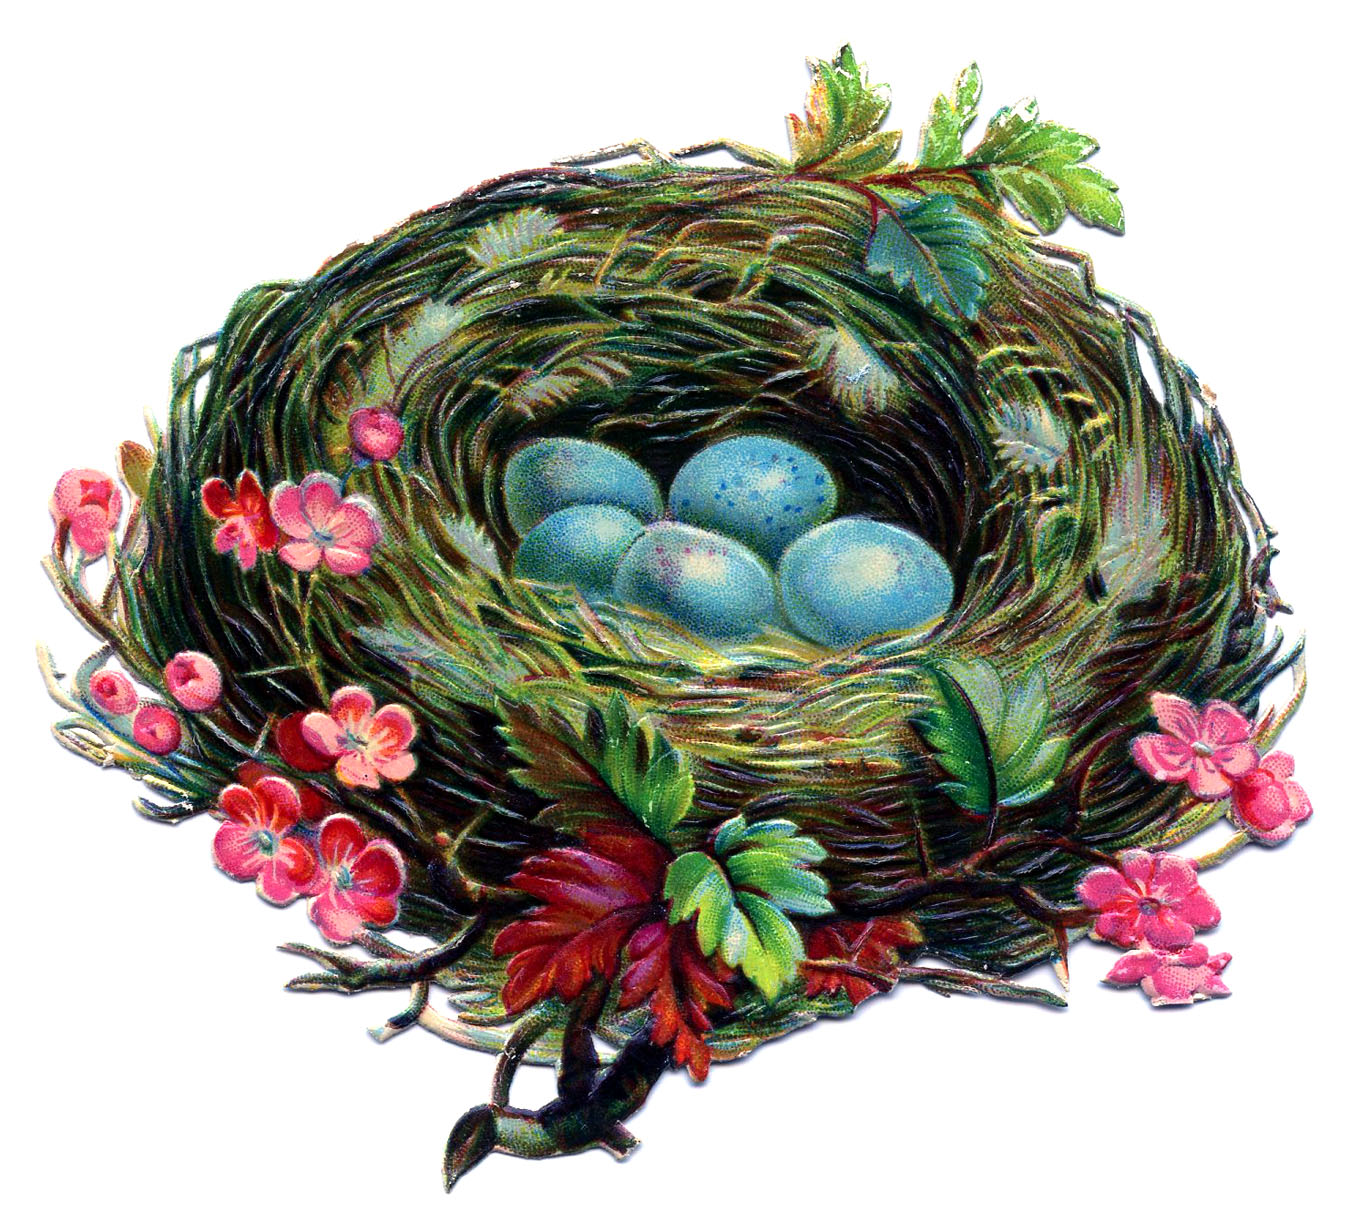 Vintage Clip Art   Pretty Nest With Blue Eggs   The Graphics Fairy